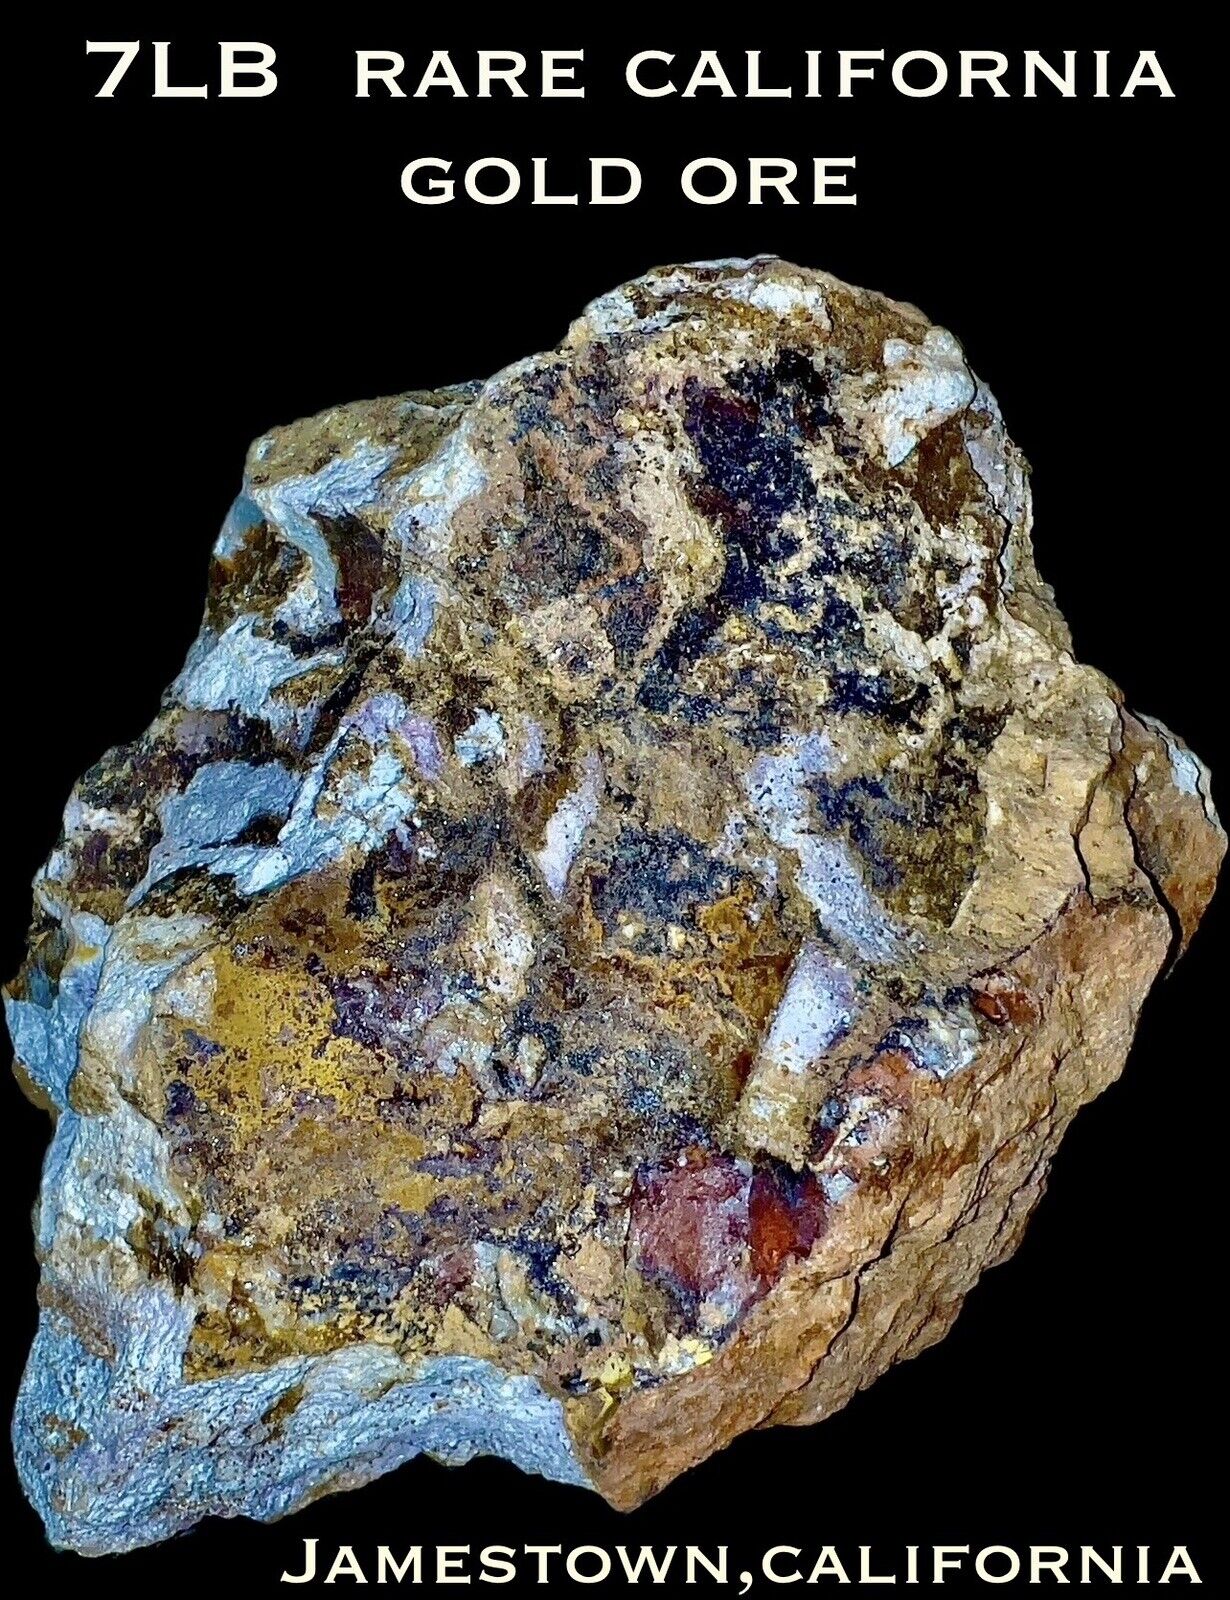 NATURAL-RAW-HIGHLY MINERALIZED-HIGH GRADE-RARE-GOLD ORE FROM THE MOTHERLODE